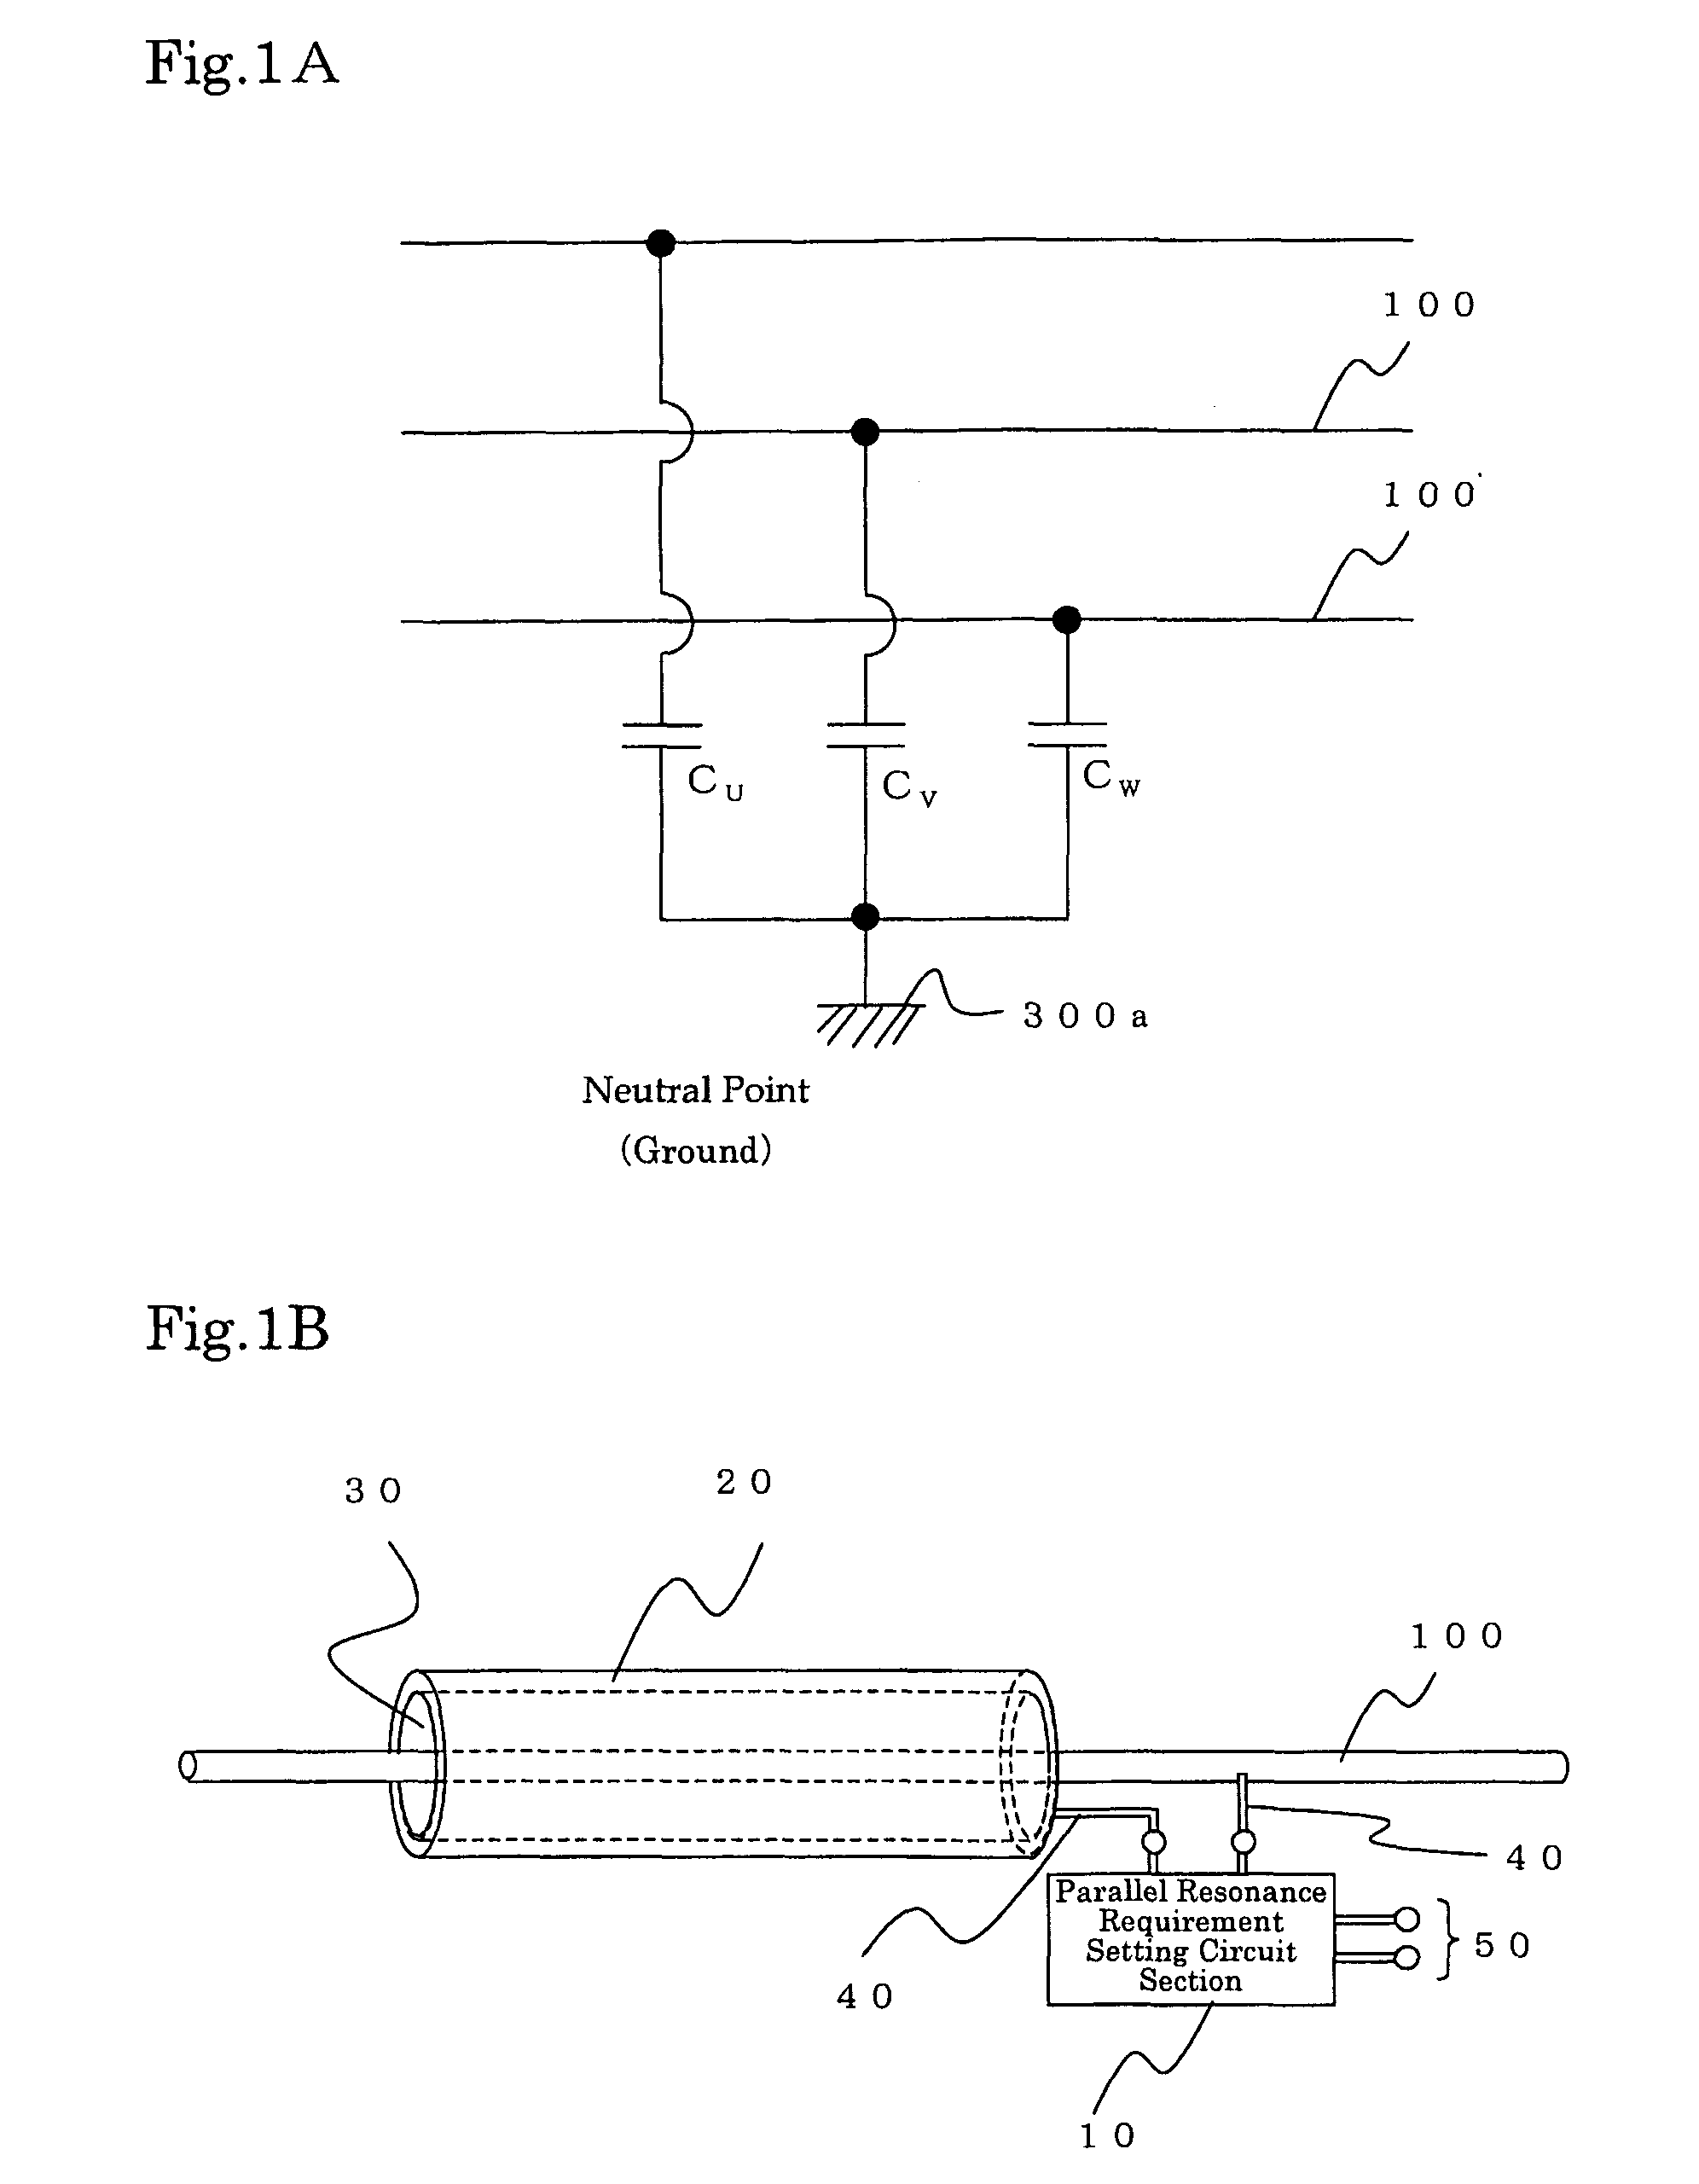 Electric power supply apparatus attached to overhead line to supply electric power to load